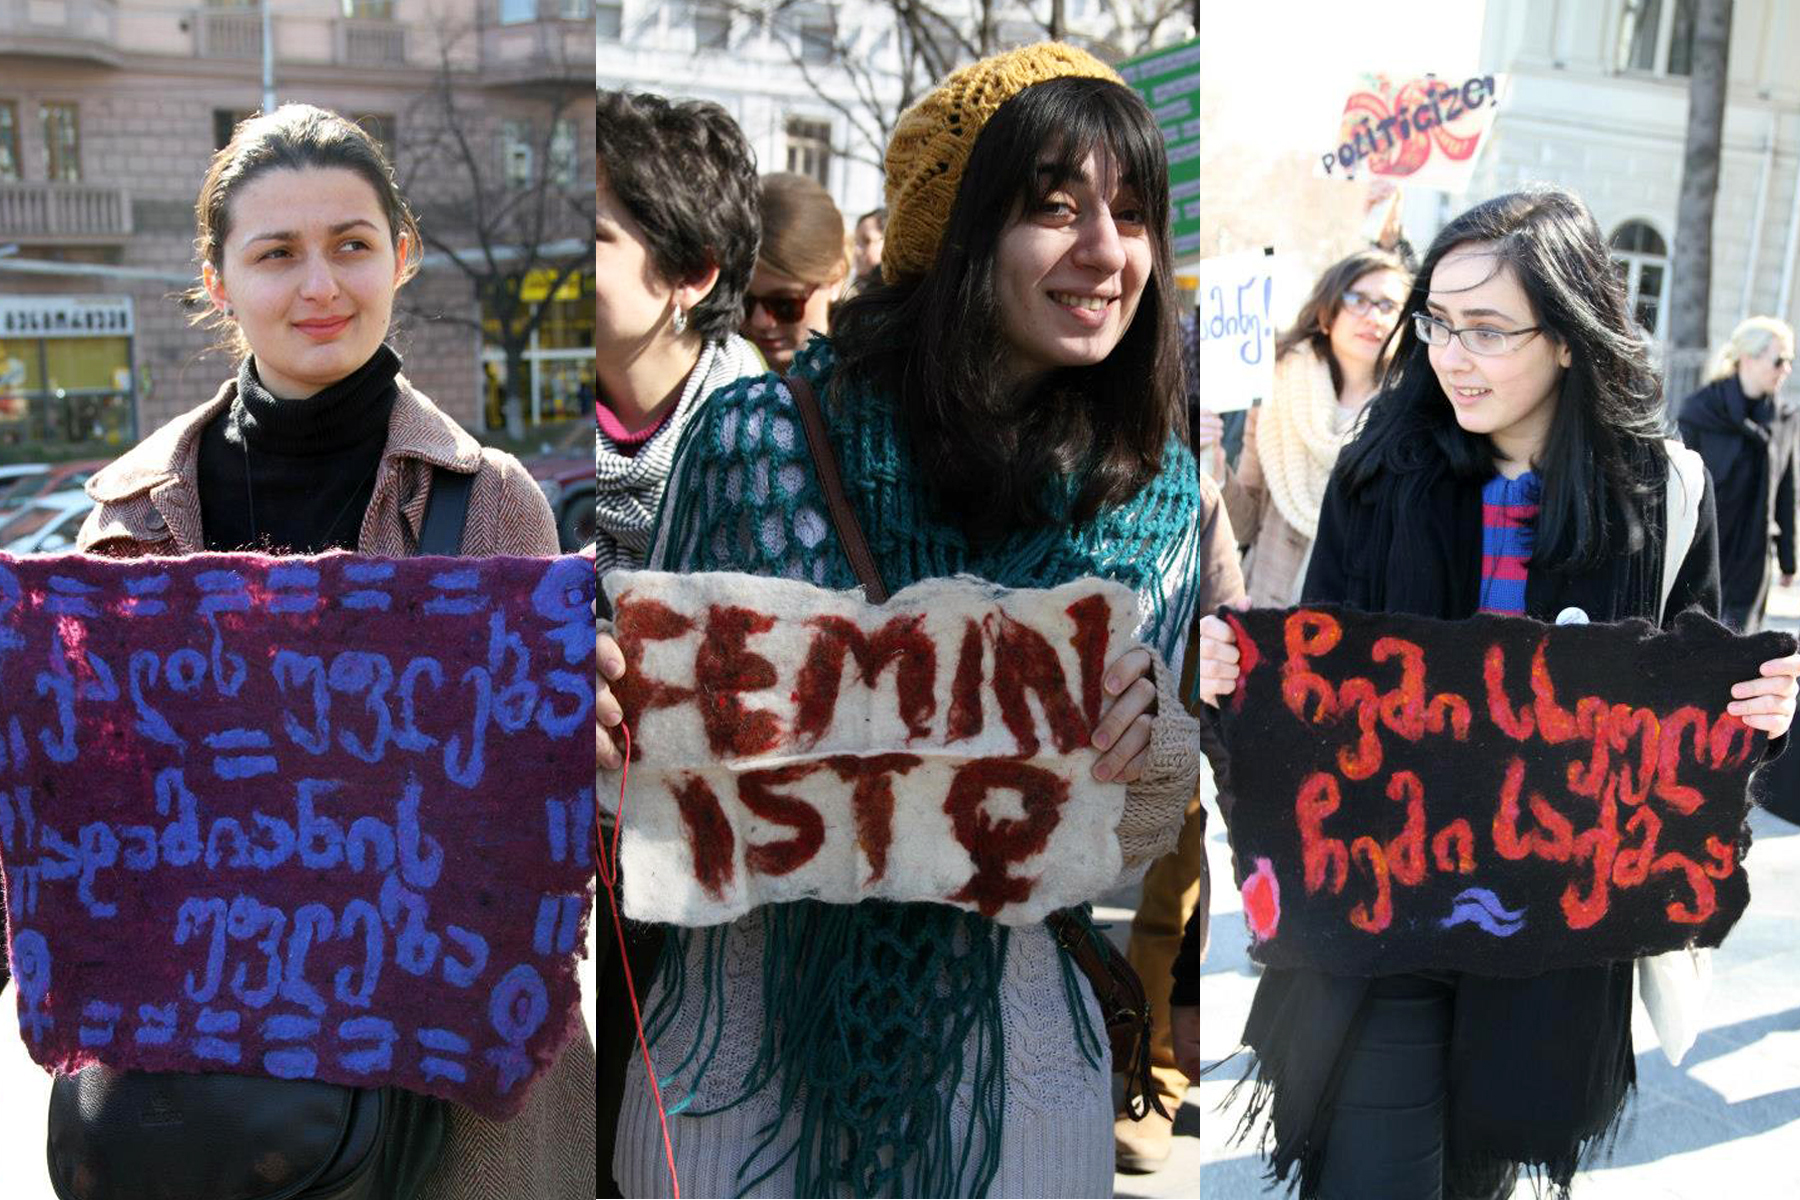   Tbilisi's first International Women's Day march with banners  